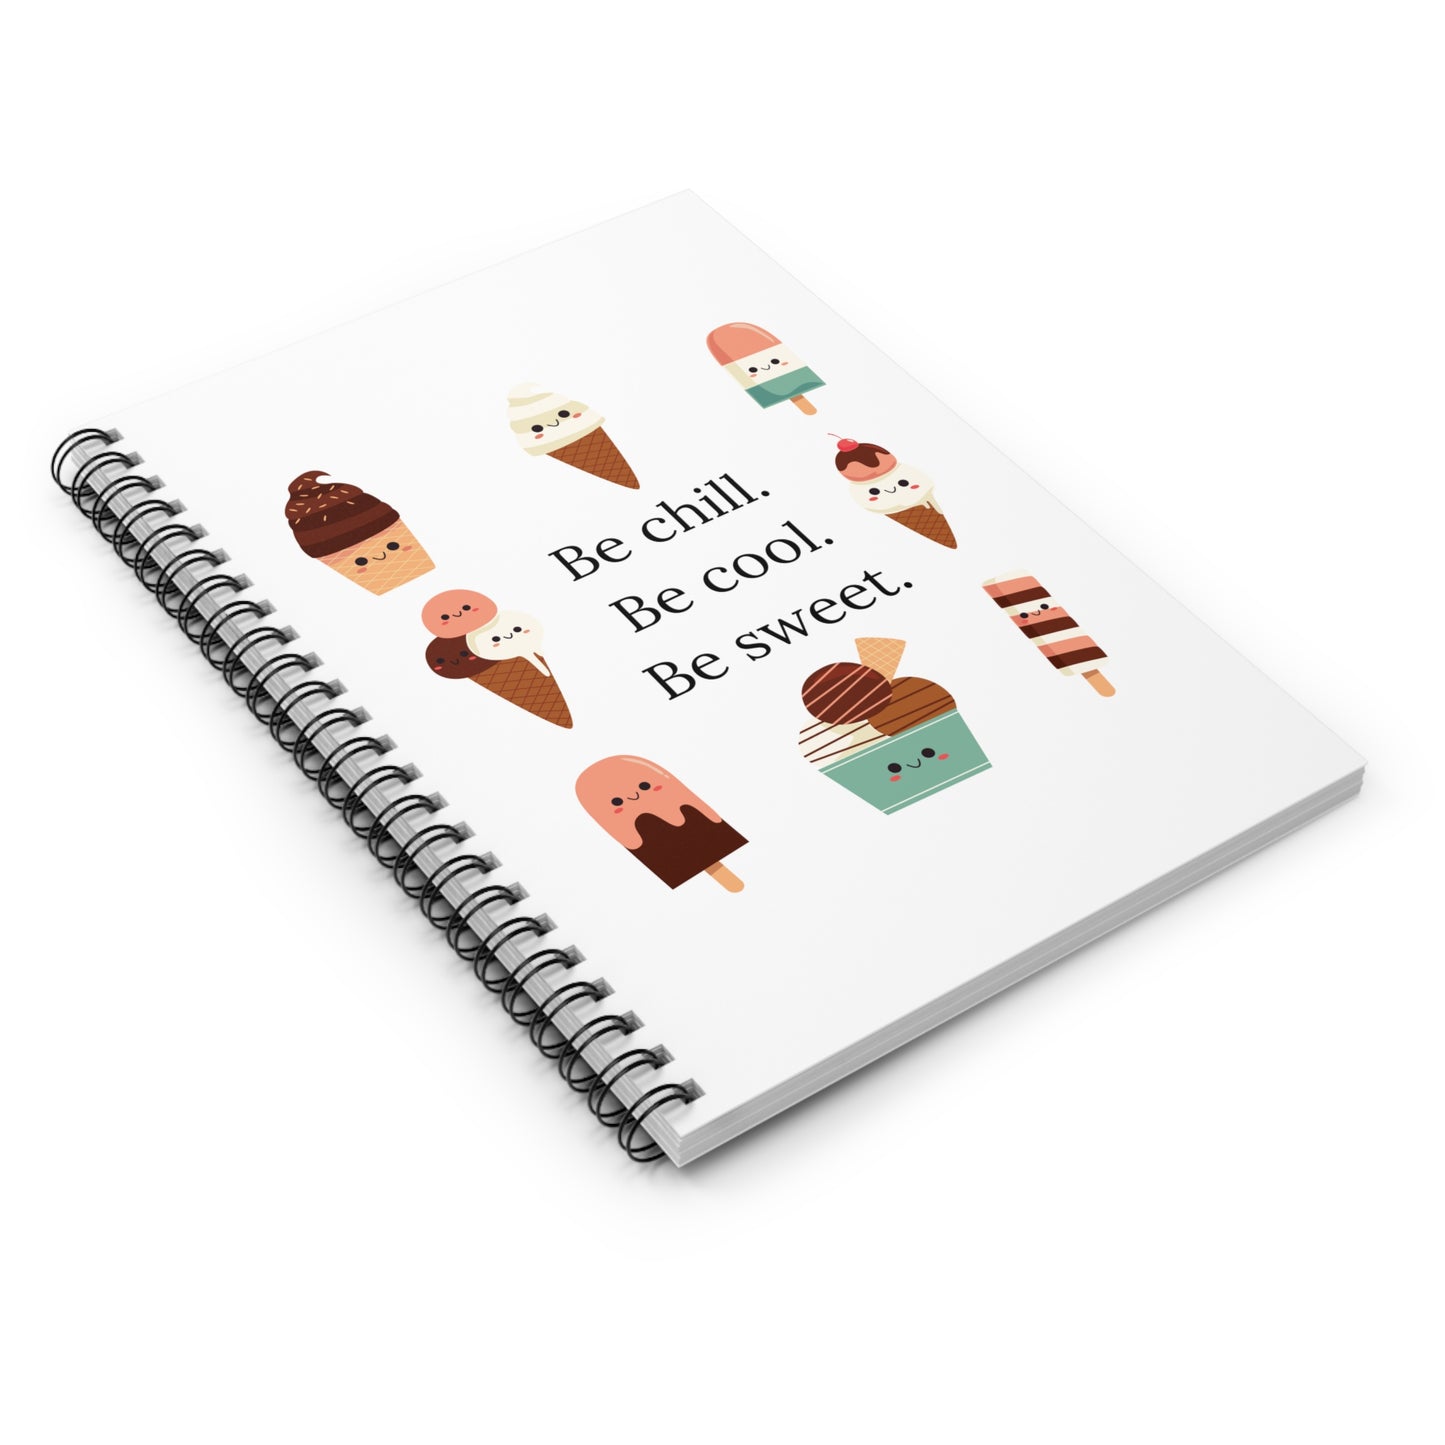 Be Chill Ice Cream Spiral Notebook - Ruled Line